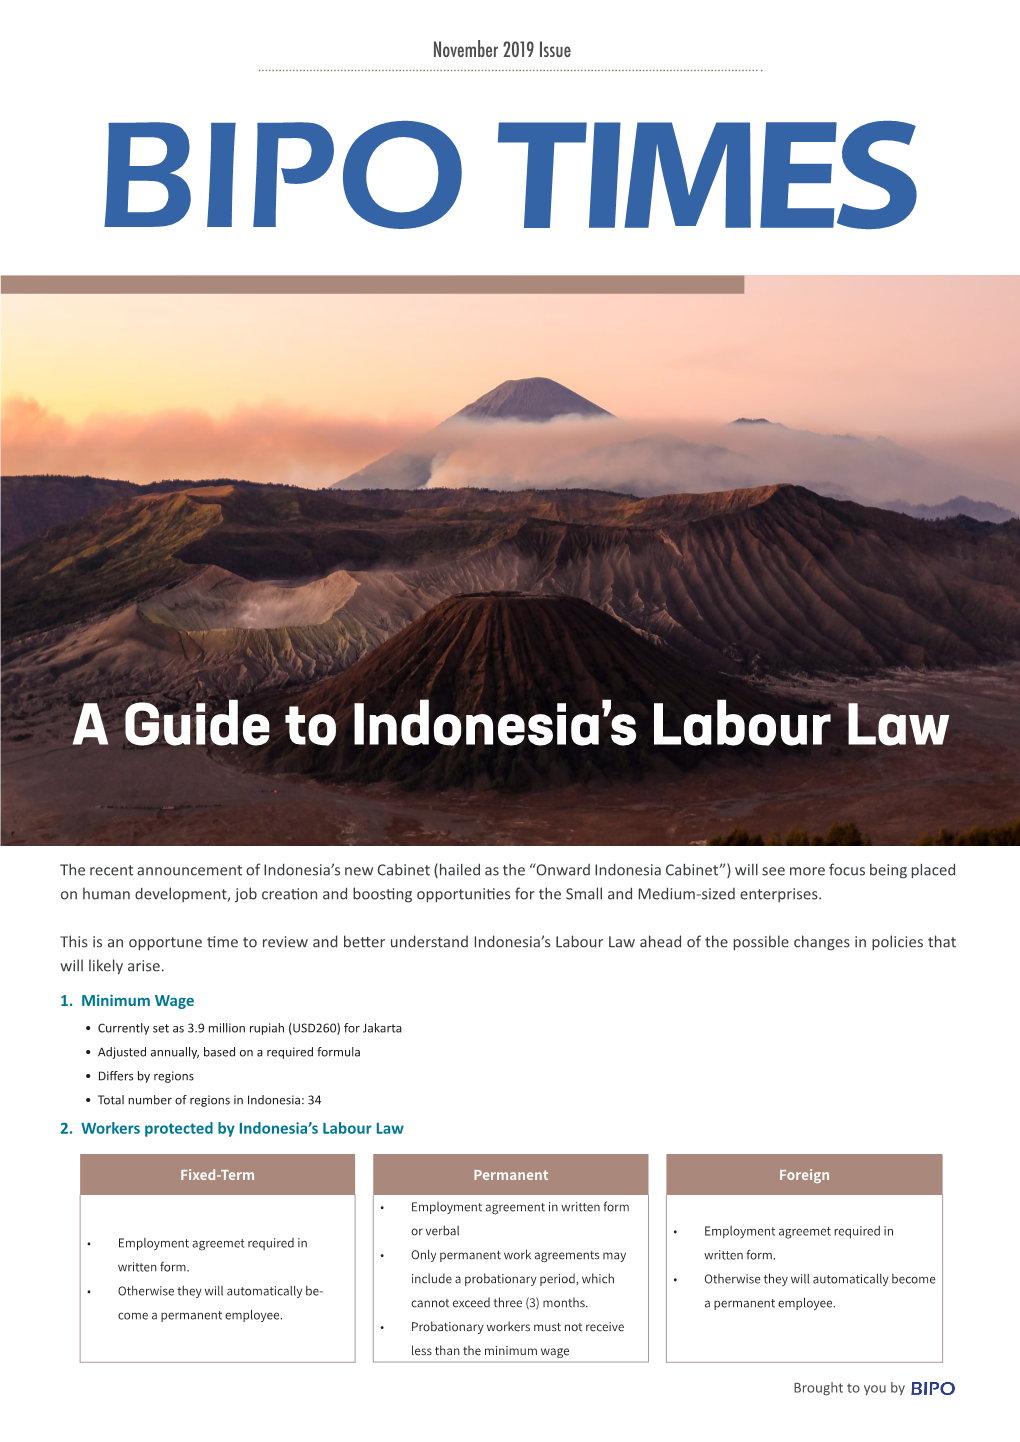 A Guide to Indonesia's Labour